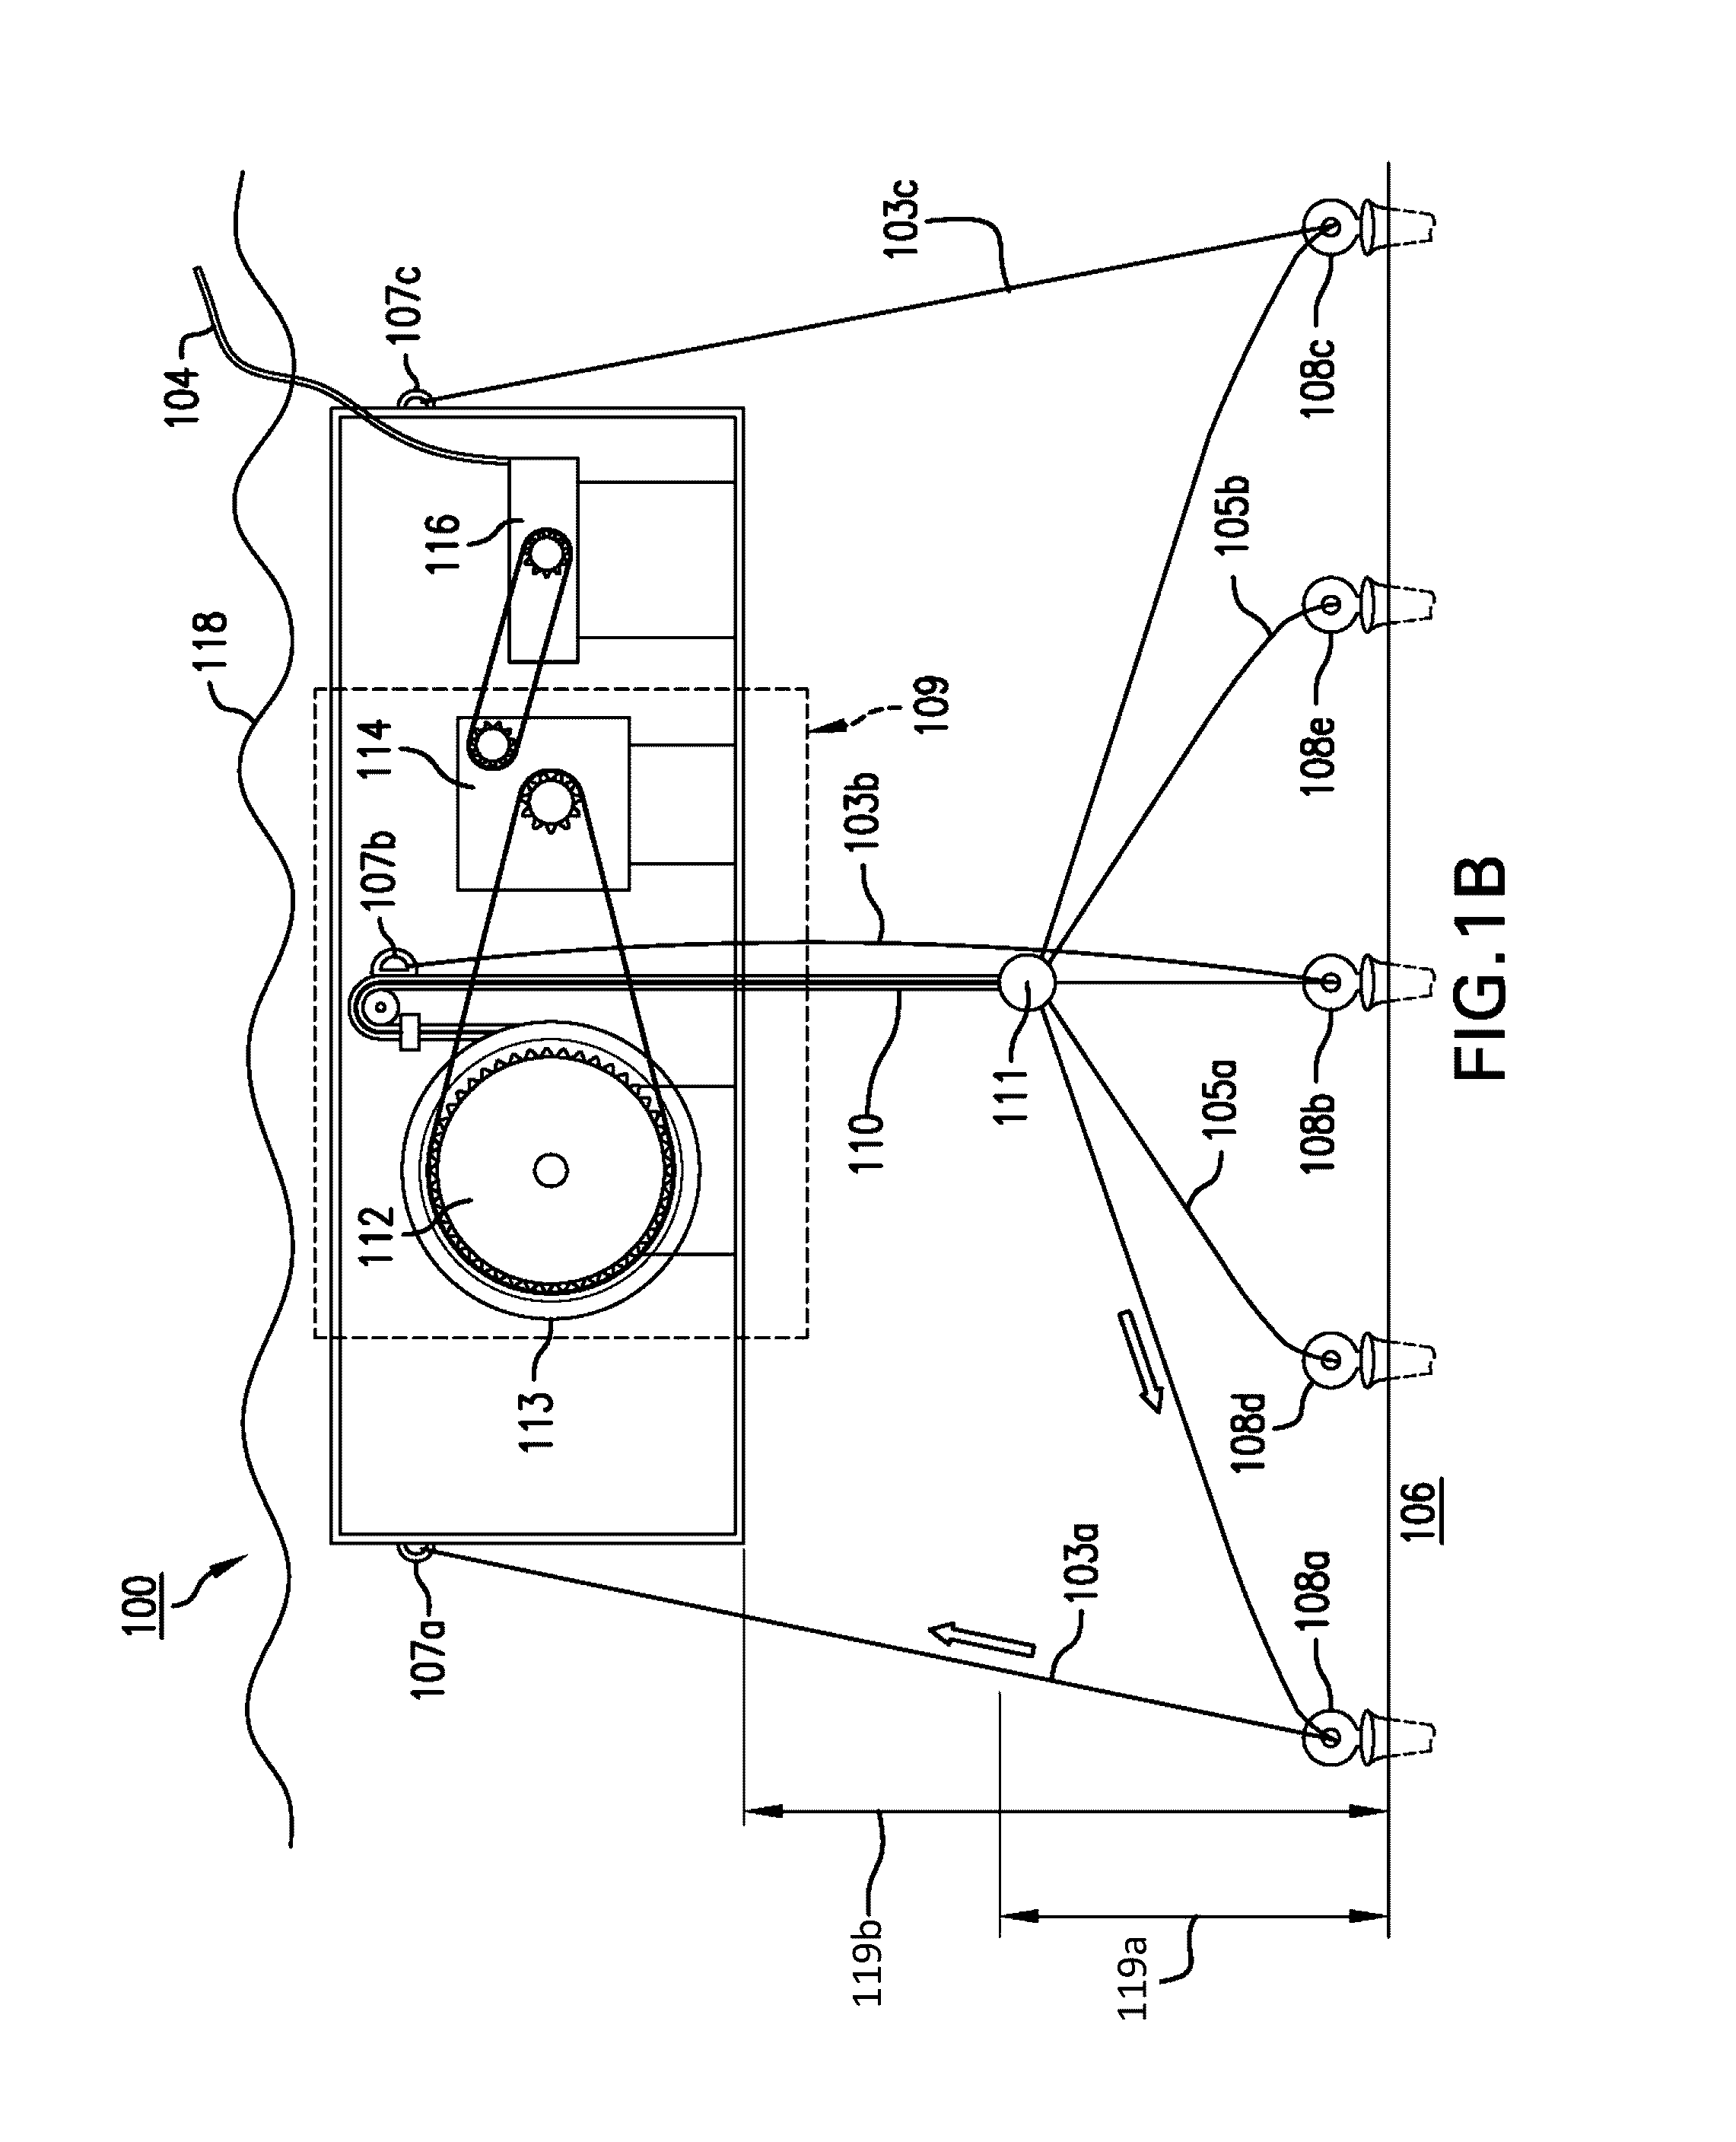 Systems and methods for tidal energy conversion and electrical power generation